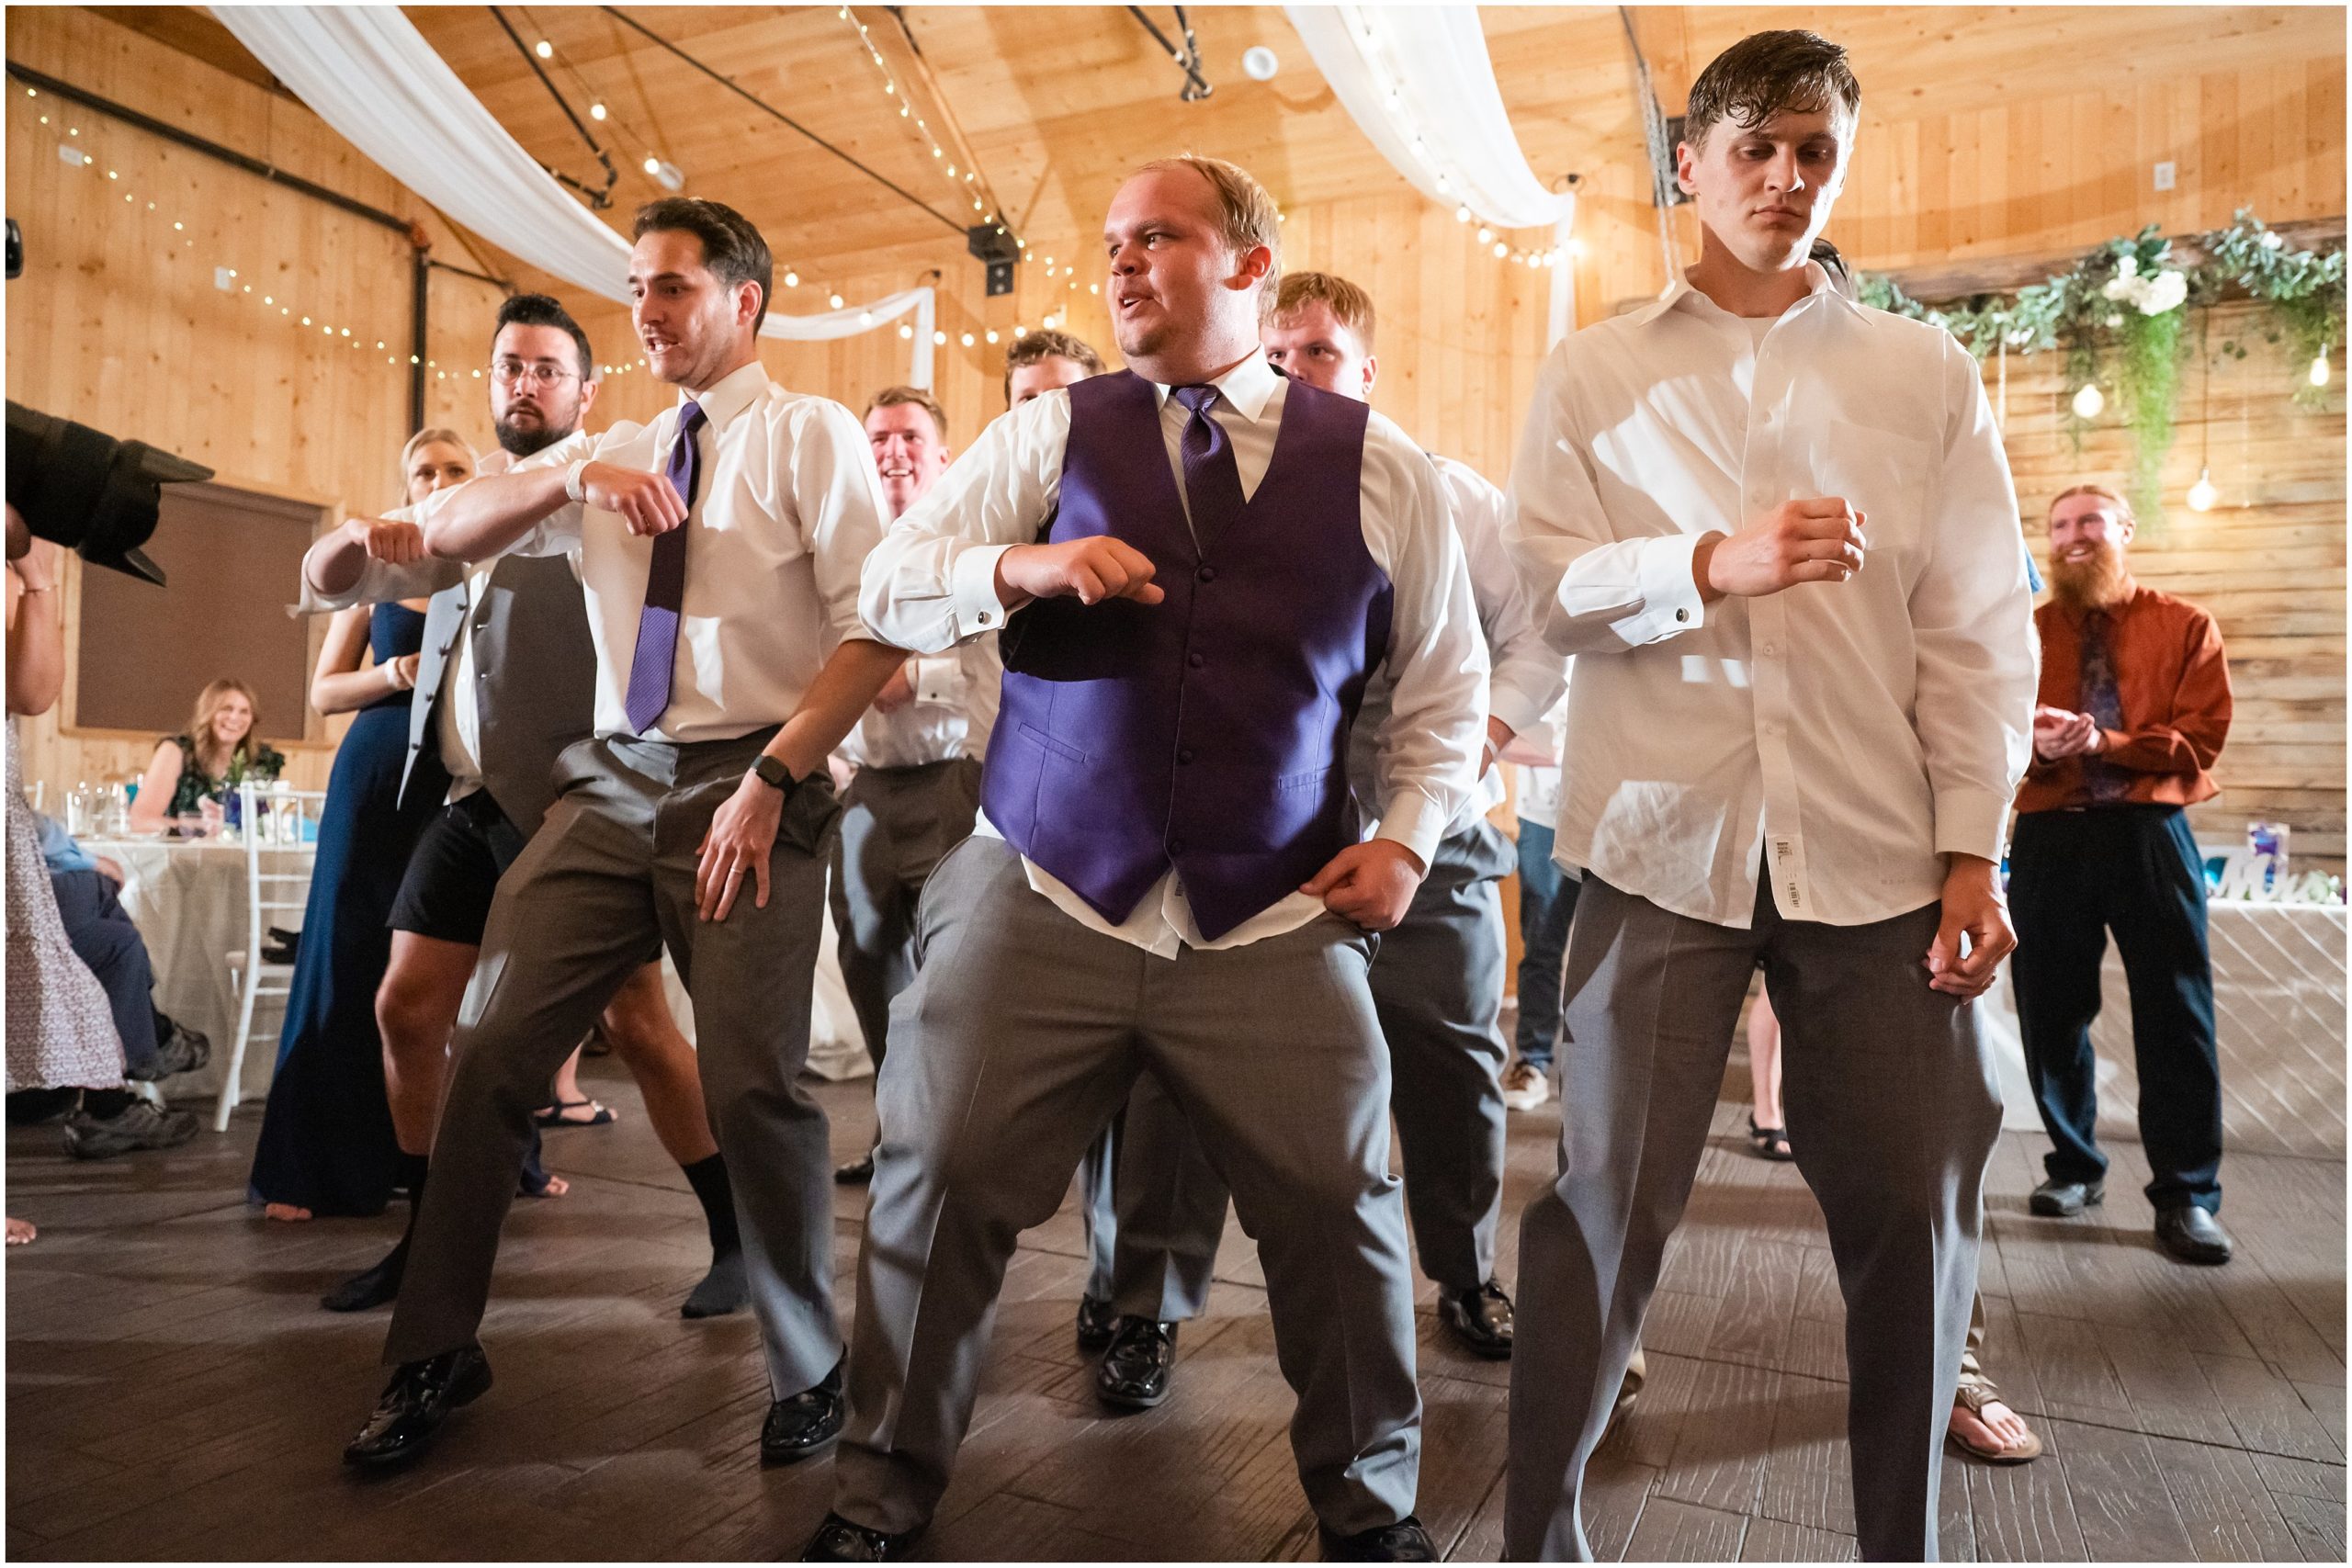 Dance party with guests in a barn | Orchid Inspired Summer Wedding at Oak Hills Utah | Jessie and Dallin Photography